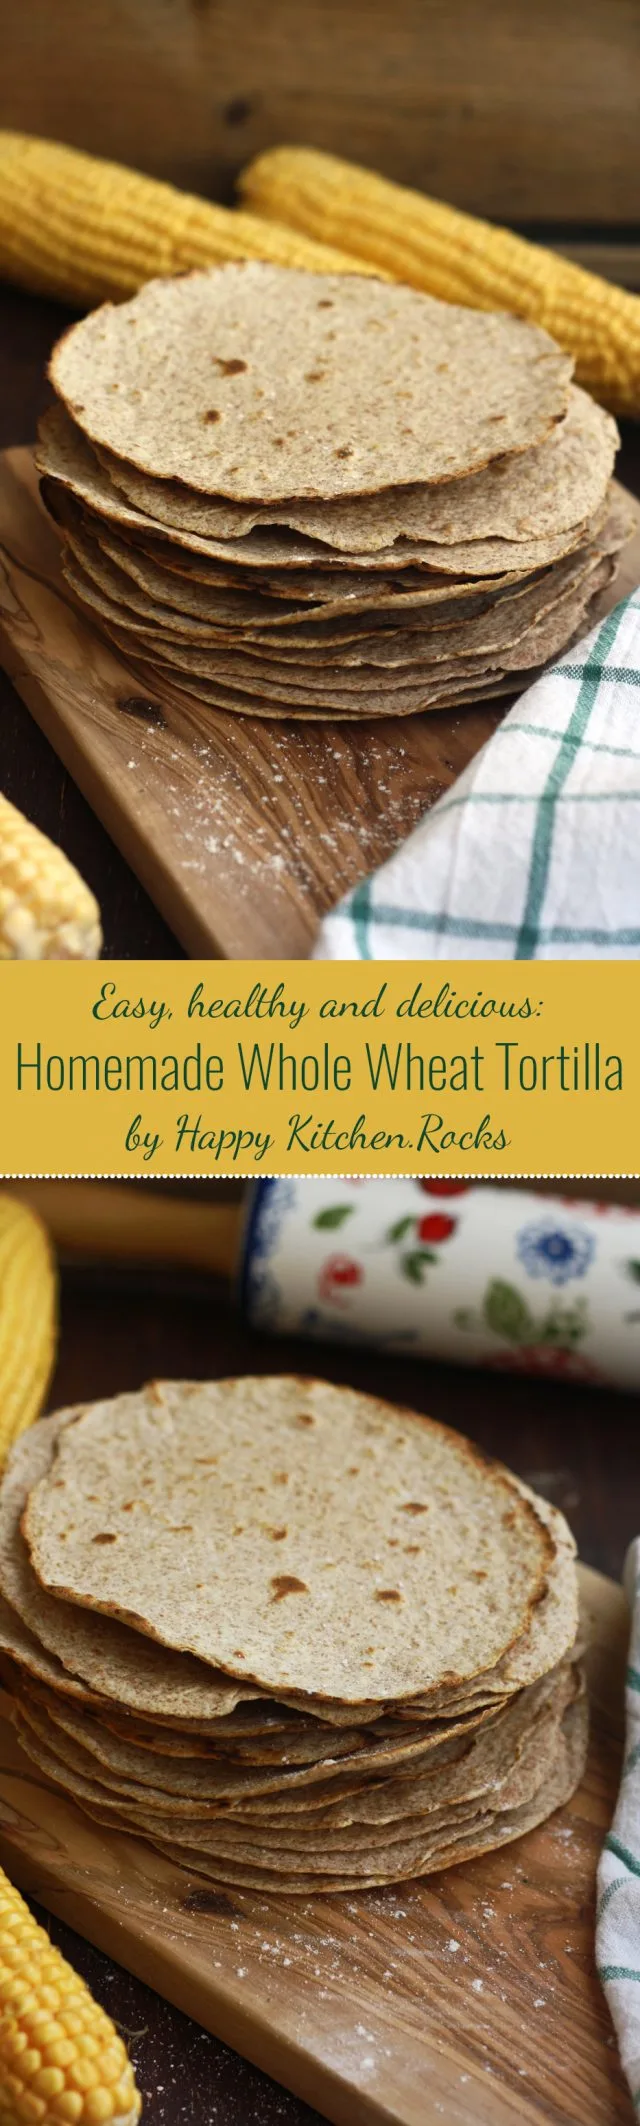 Easy homemade whole wheat tortilla recipe only takes 30 minutes to make from scratch! They freeze well and are much healthier and cheaper than store-bought.